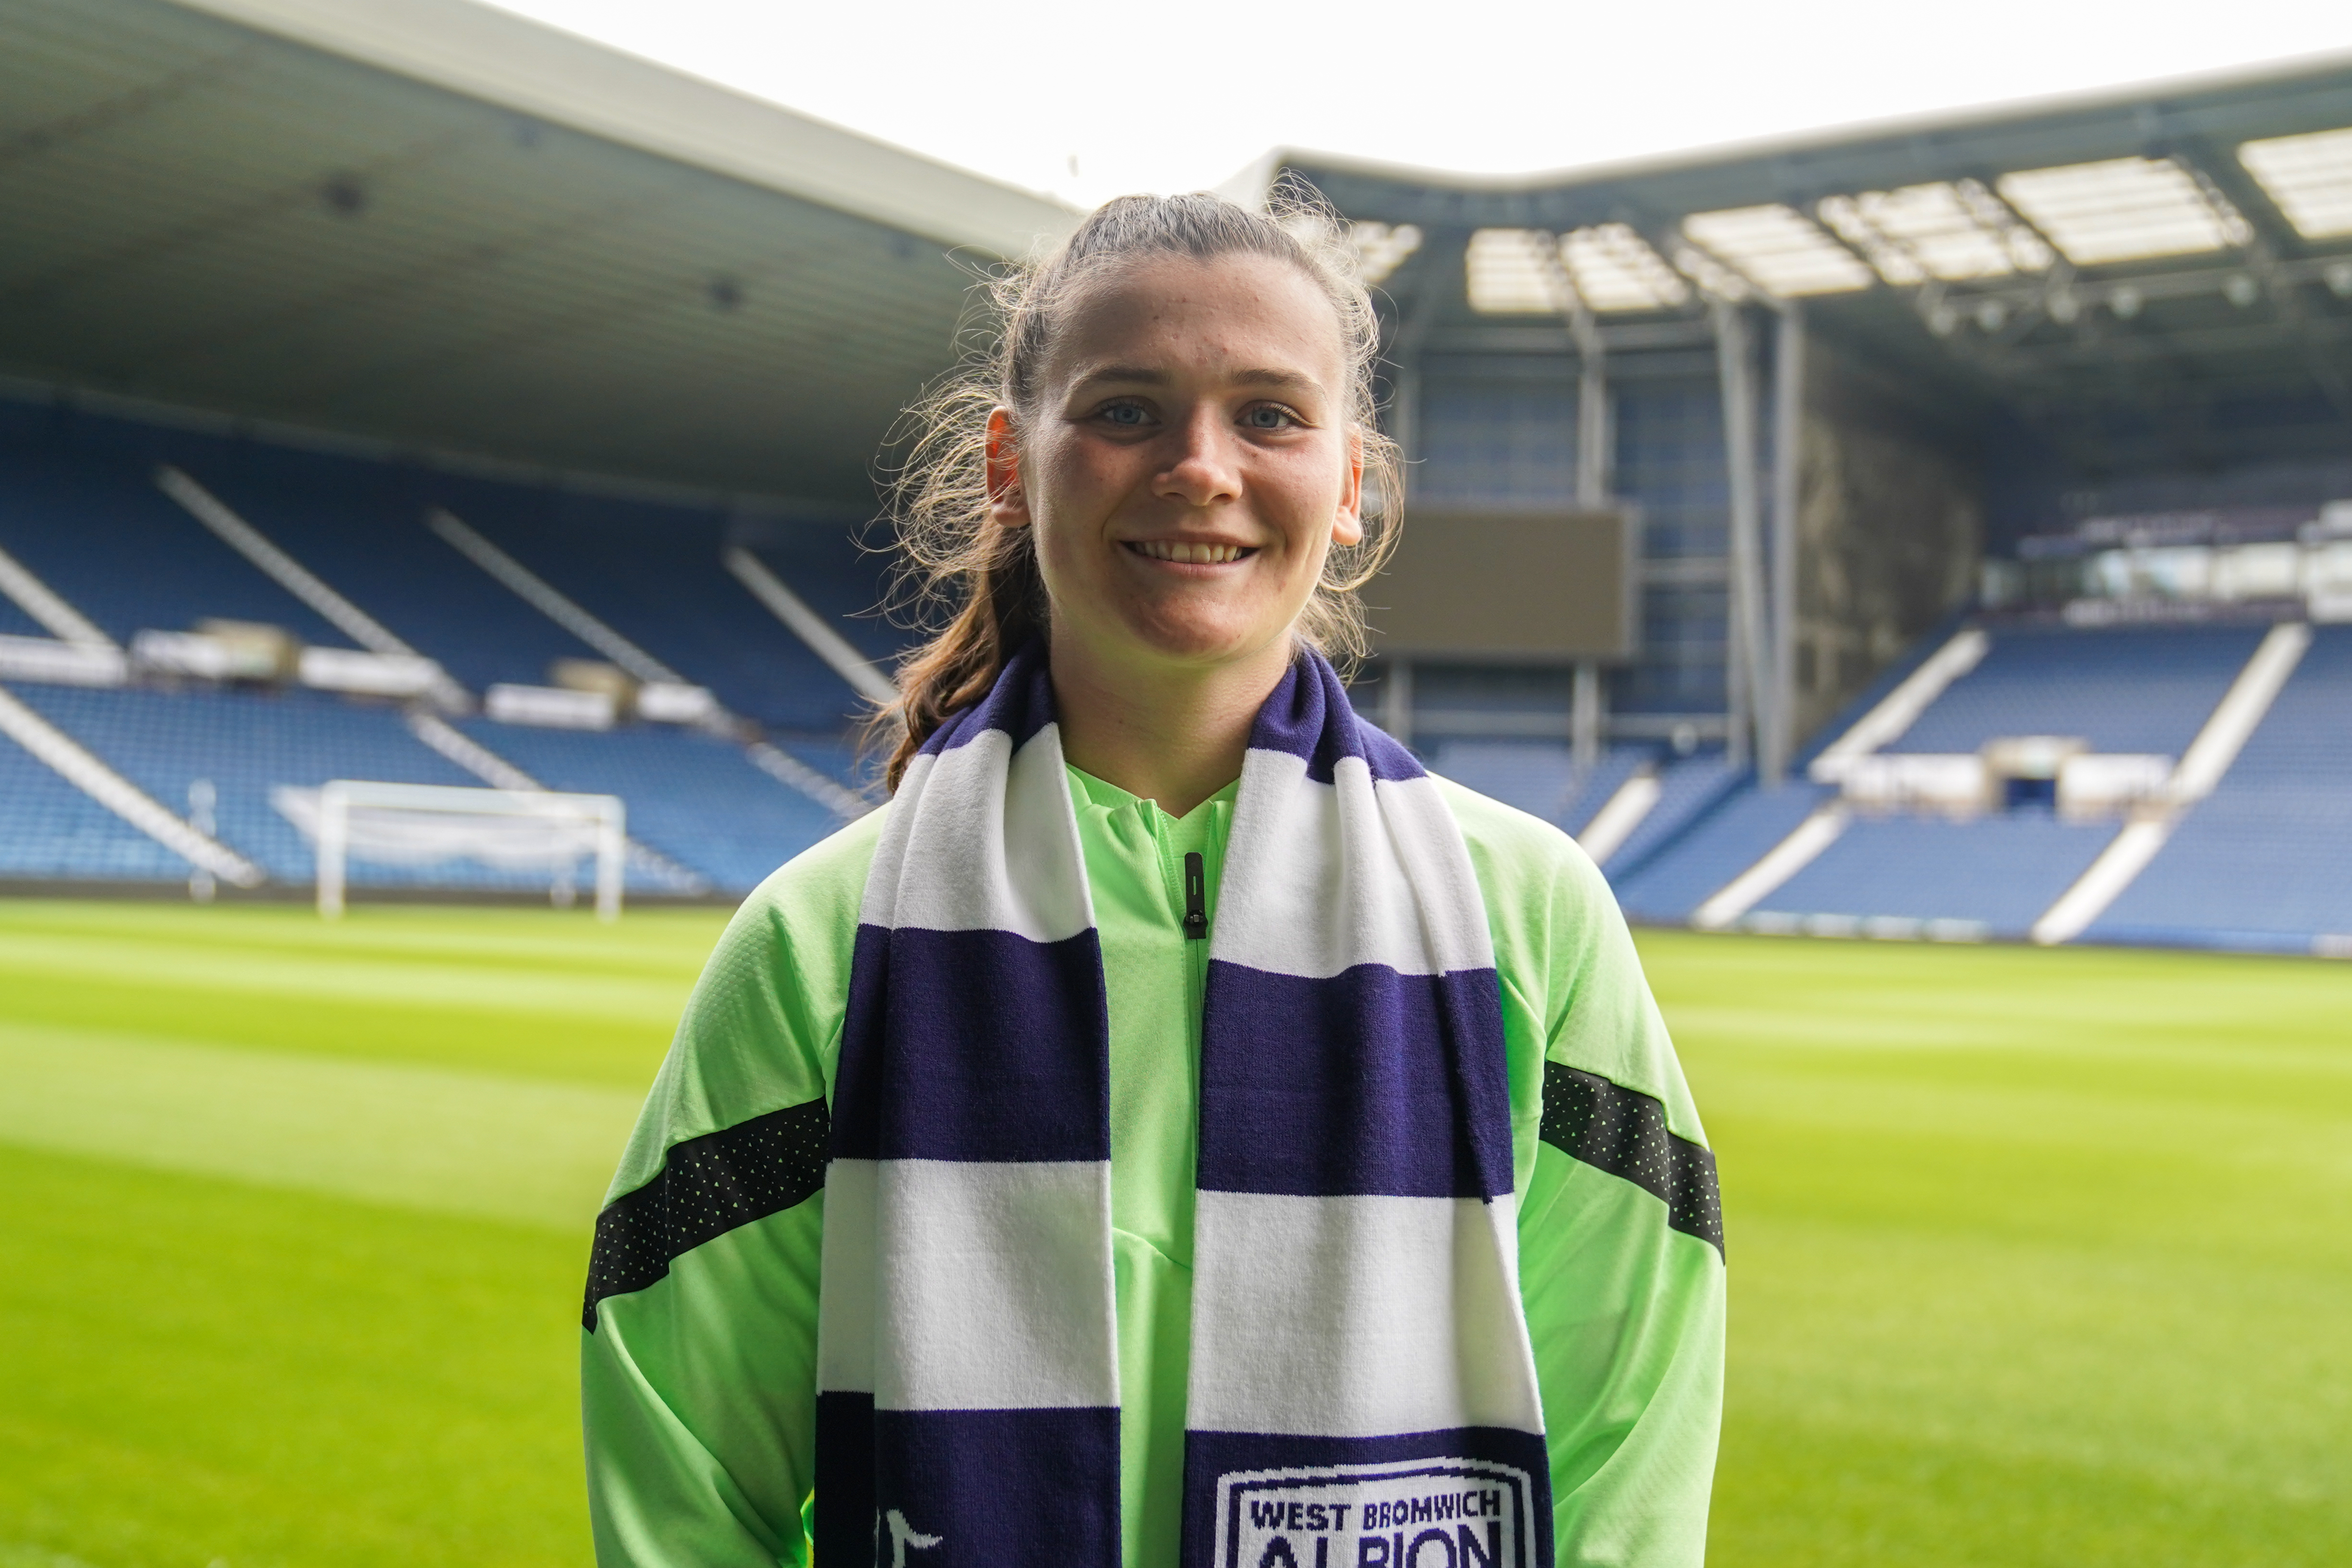 Clarke has signed for Albion Women on loan from Liverpool